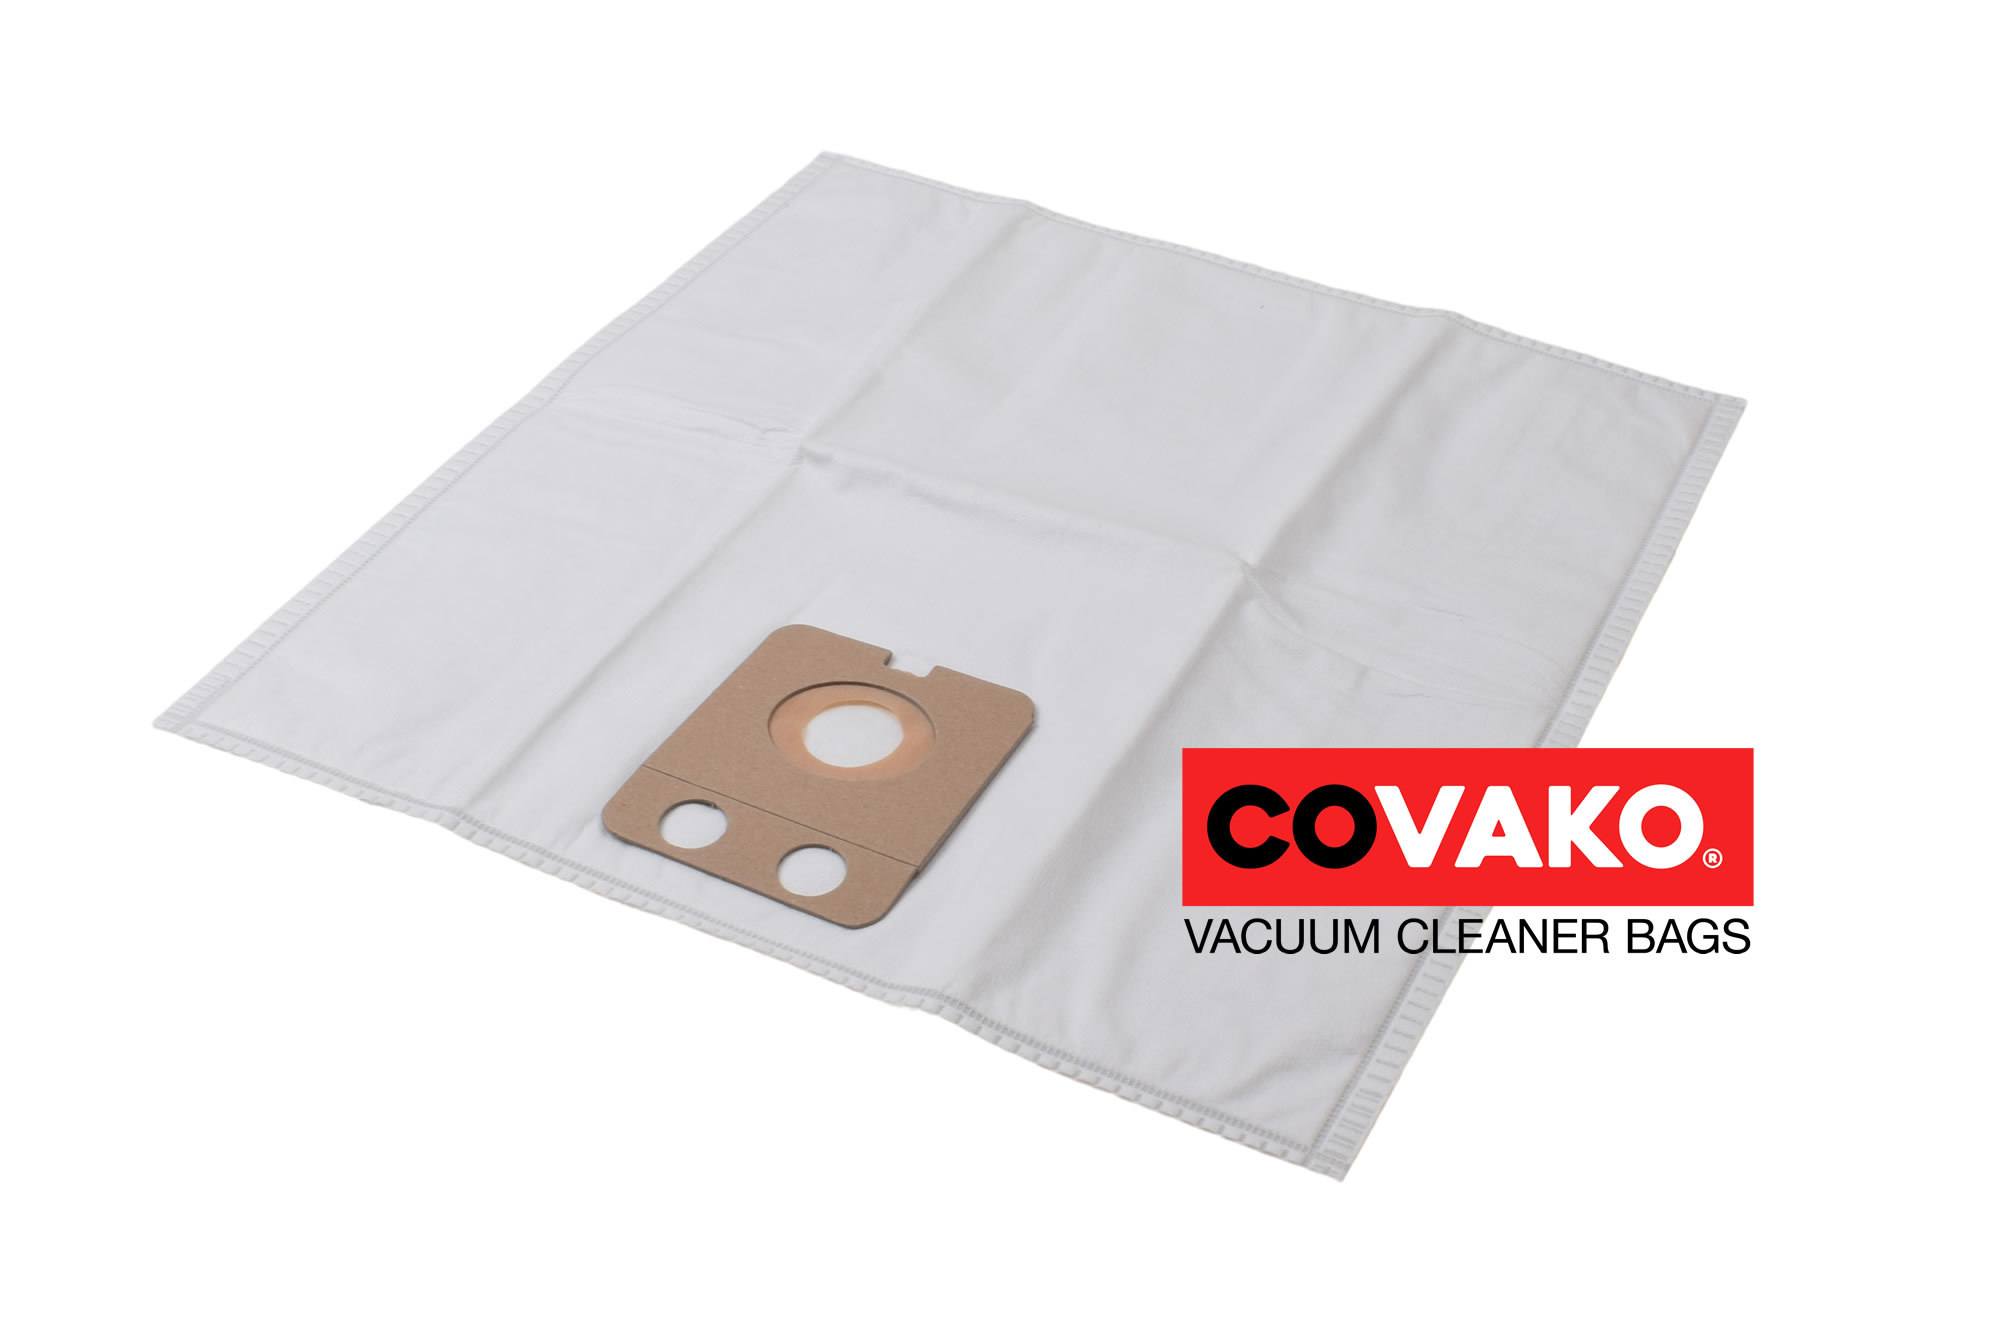 Alto GD 2000 Hepa / Synthesis - Alto vacuum cleaner bags